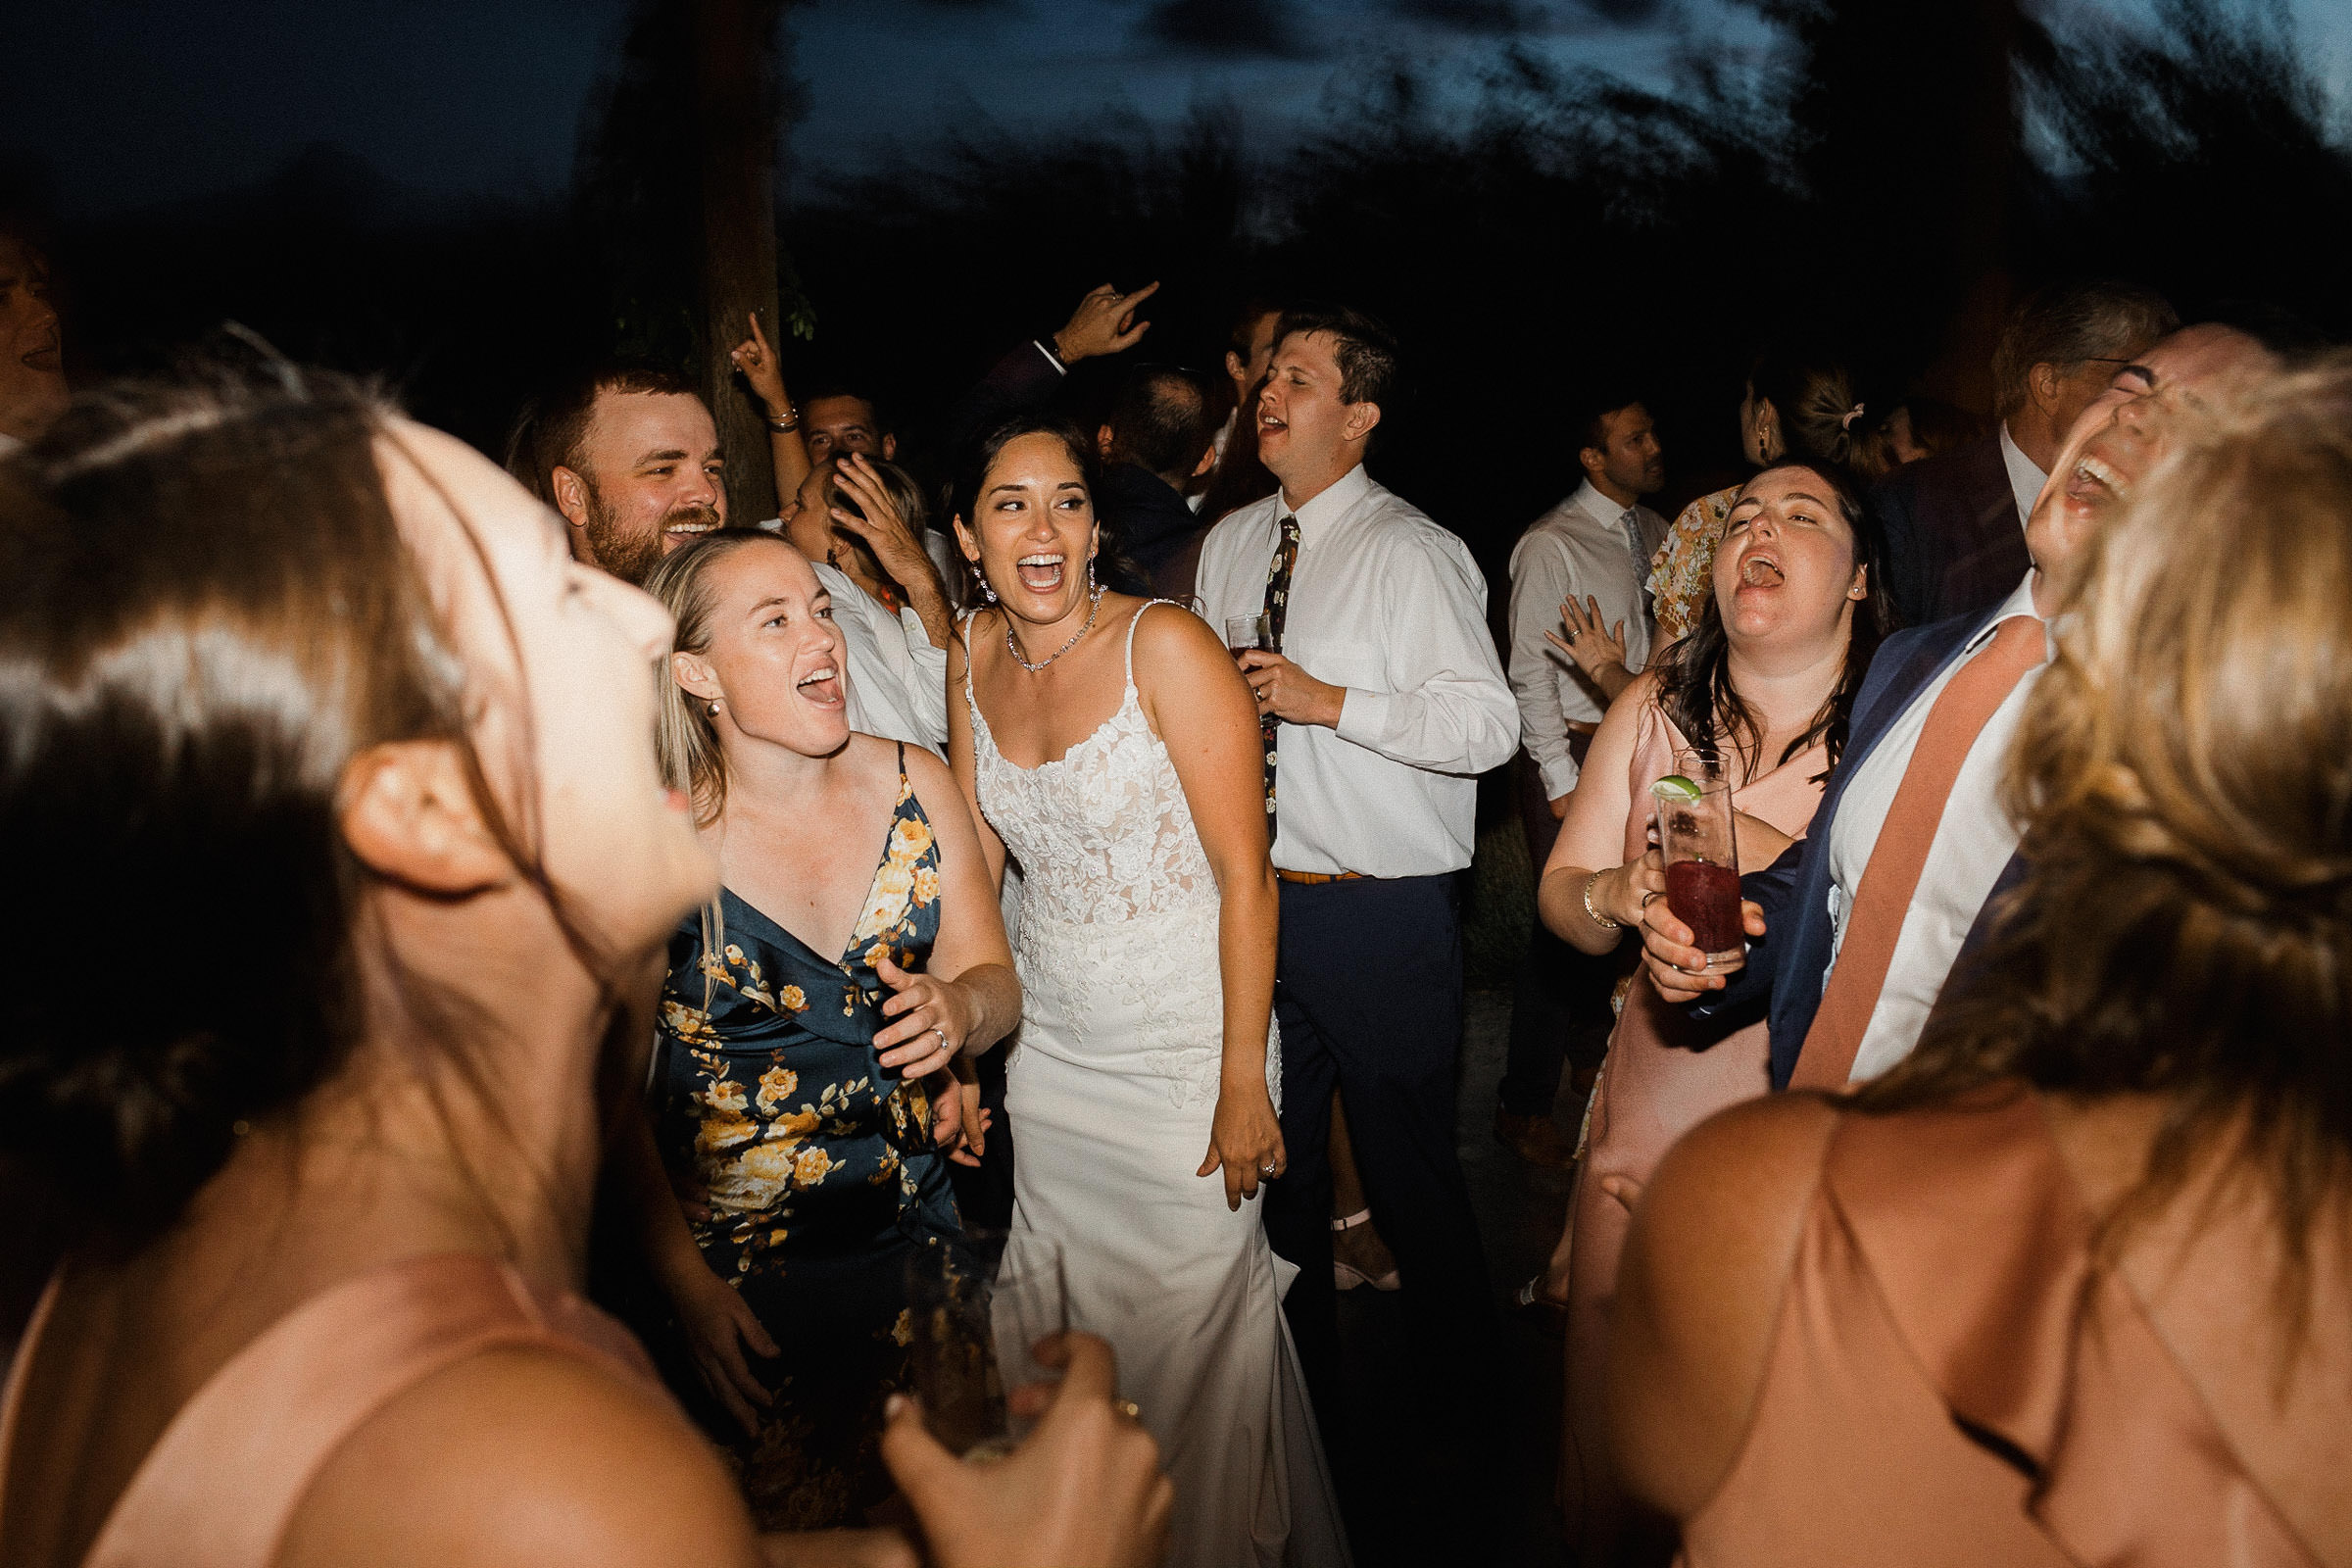 Bride and guests sing along to a song on the dance floor